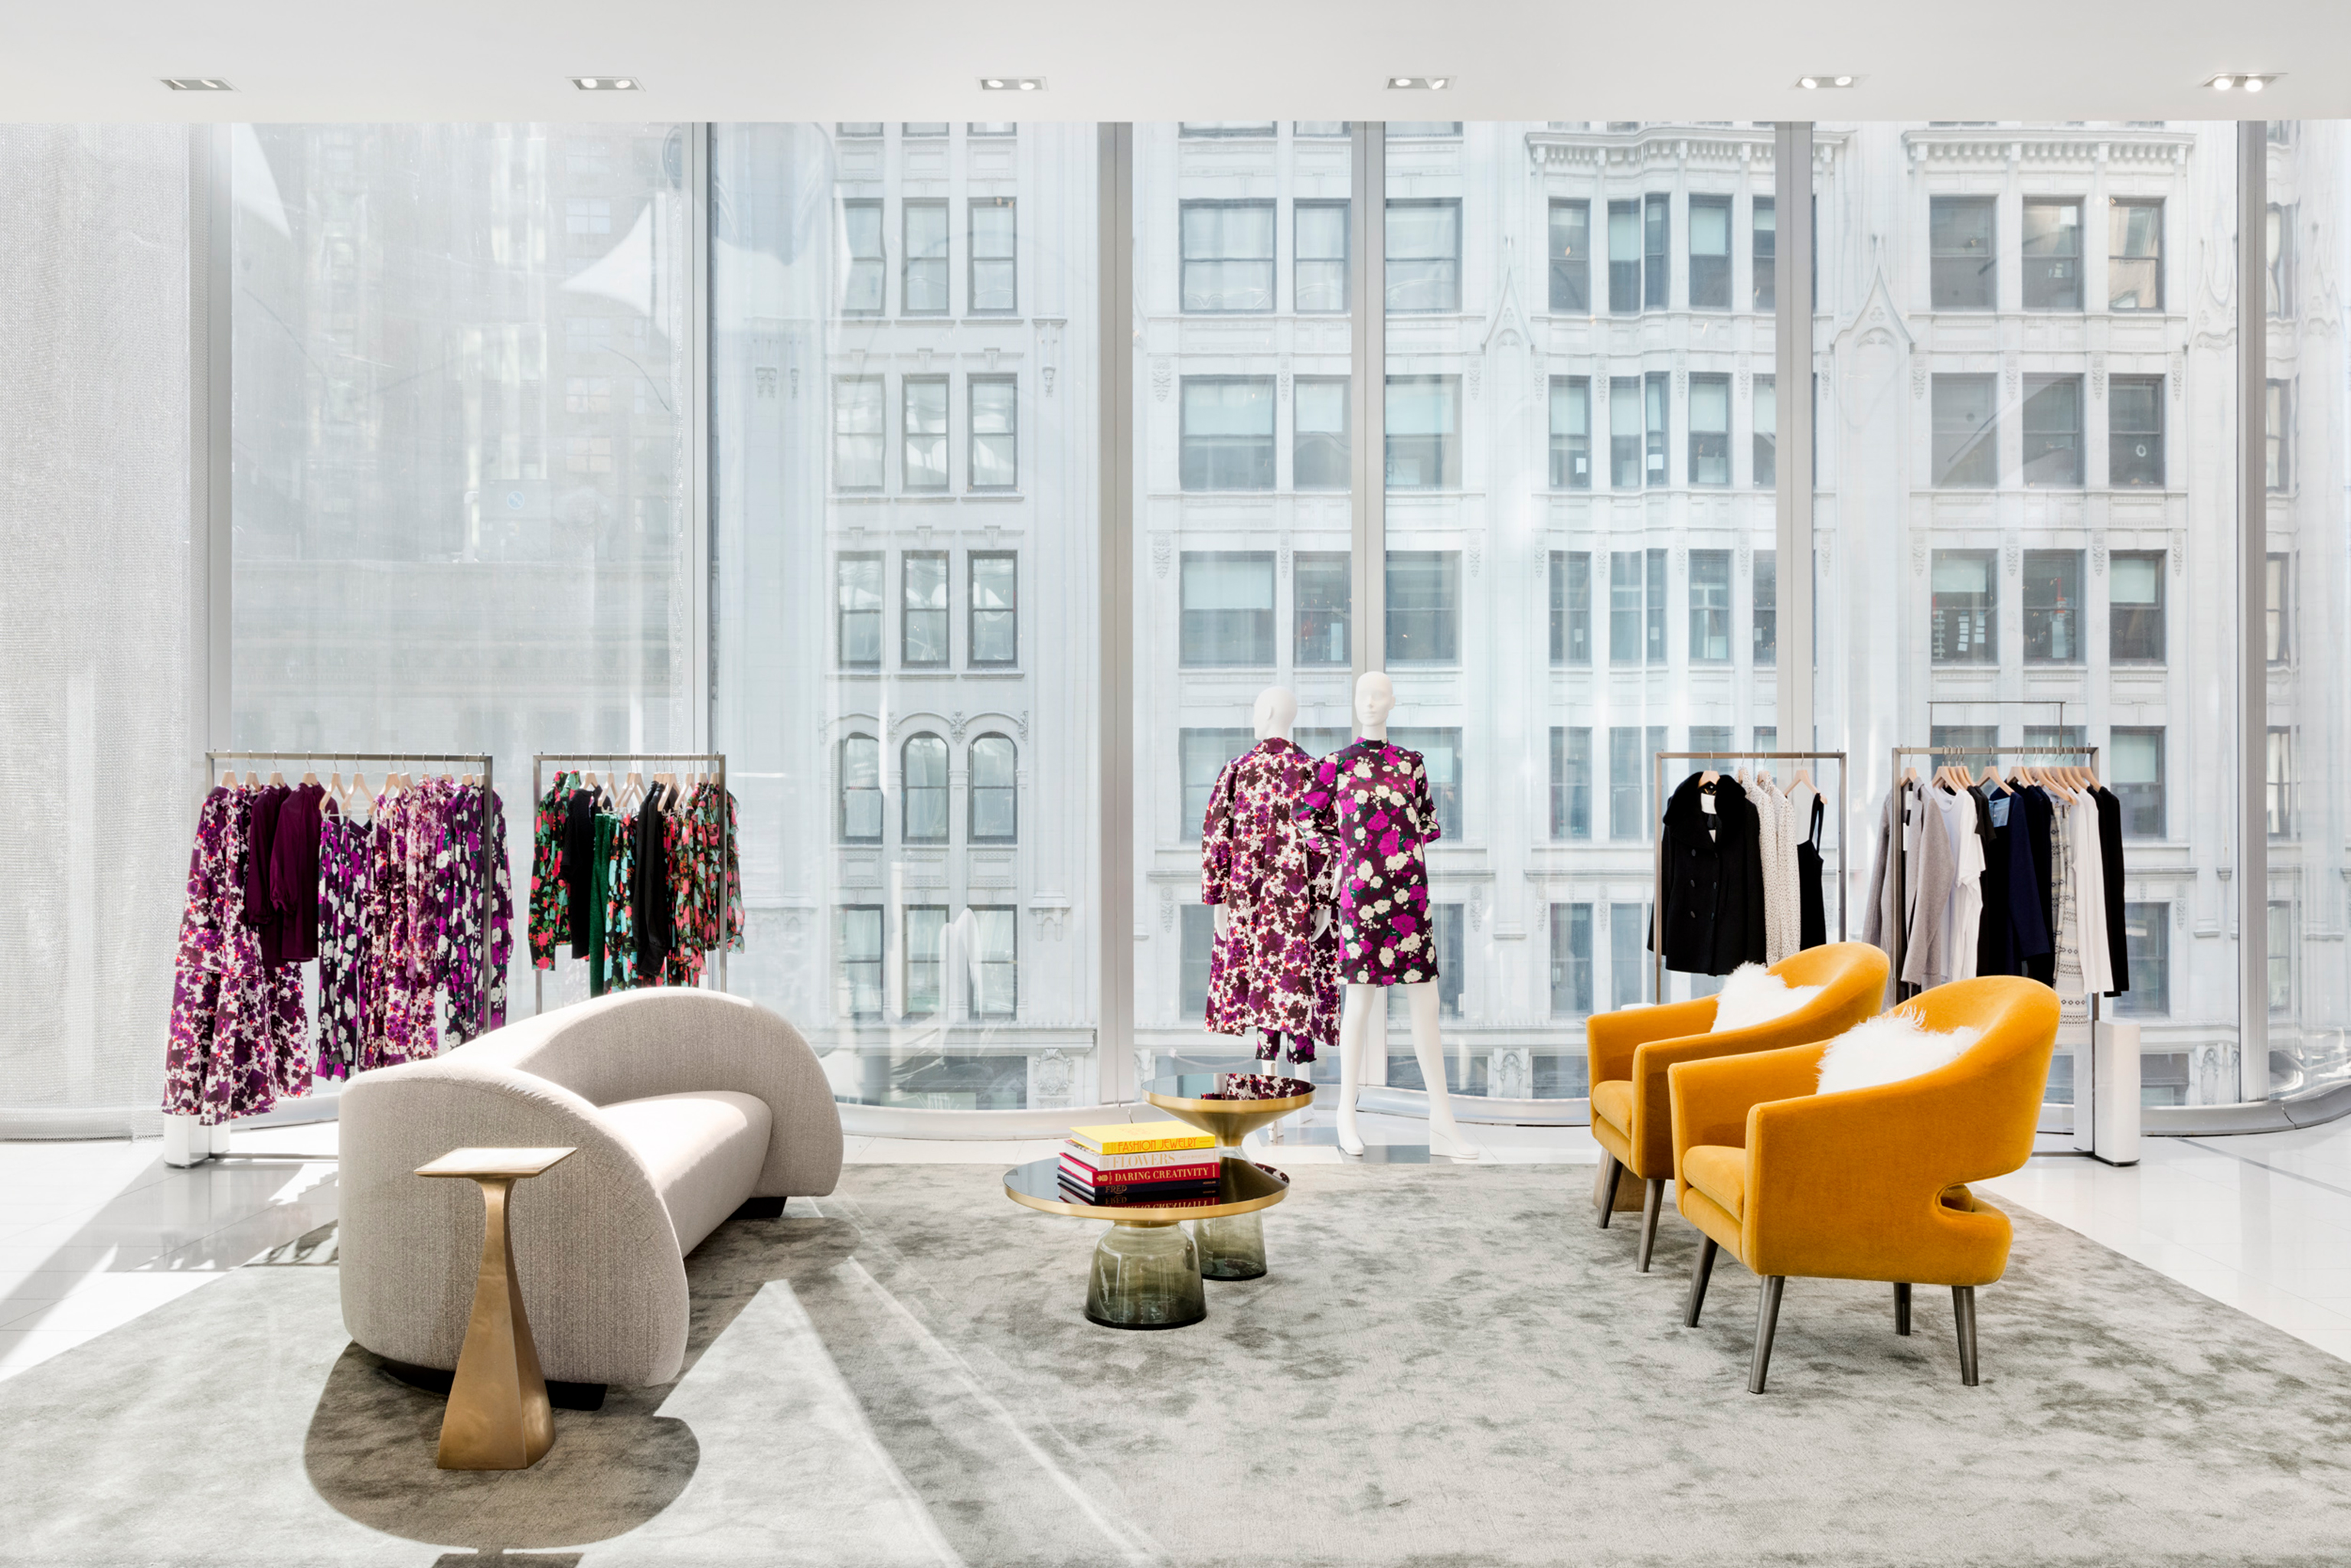 Nordstrom pop-up shop features Mexican designers